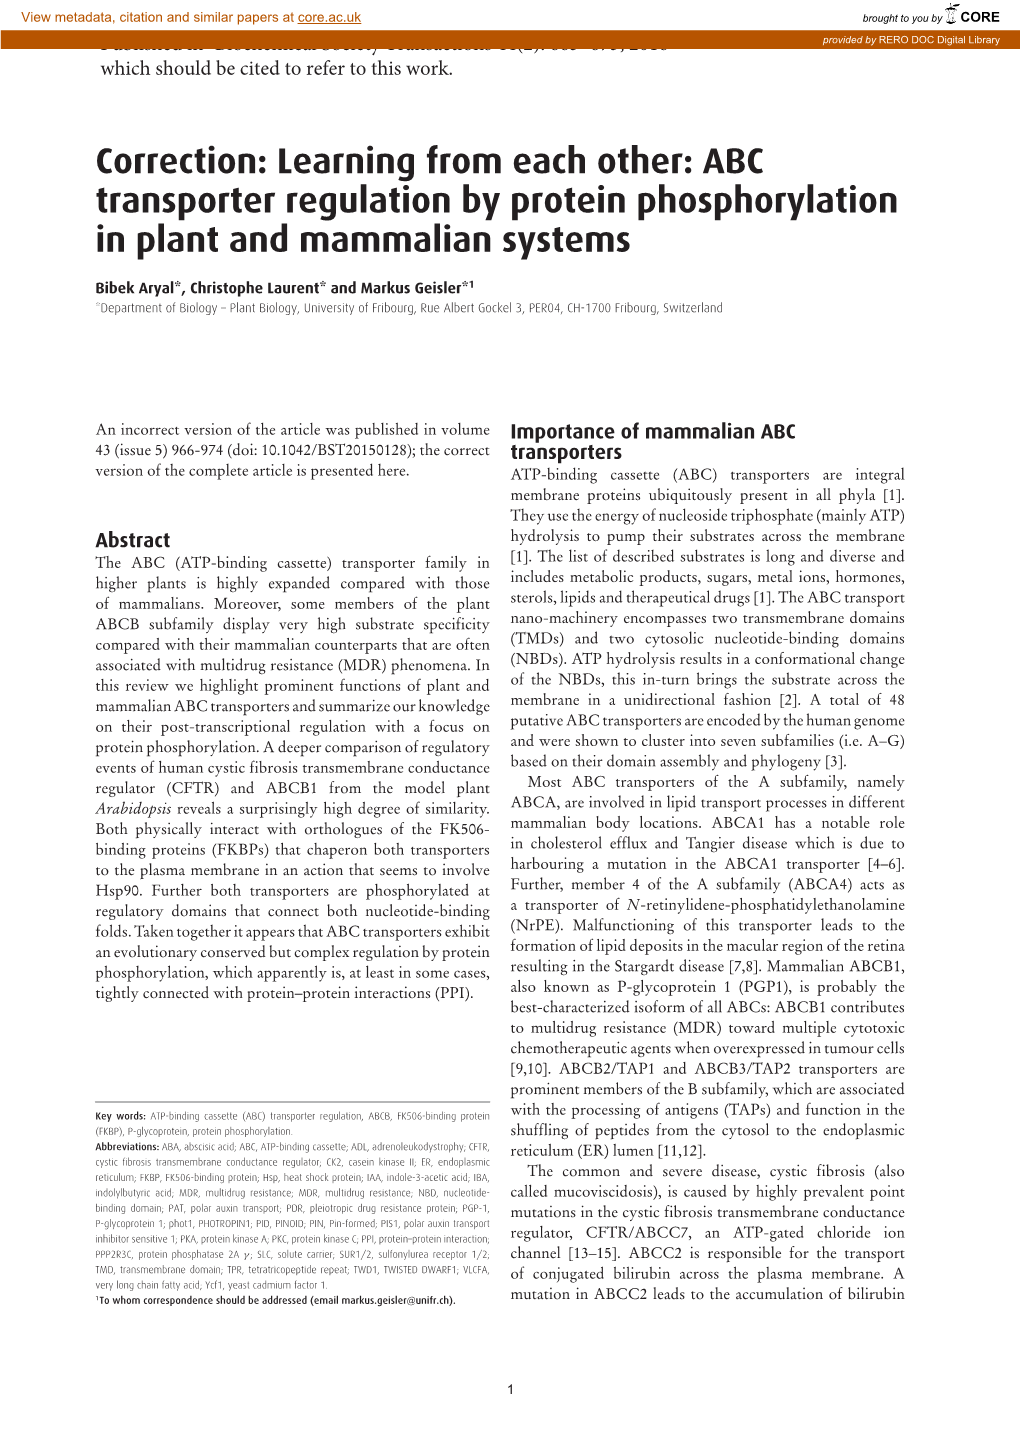 ABC Transporter Regulation by Protein Phosphorylation in Plant and Mammalian Systems